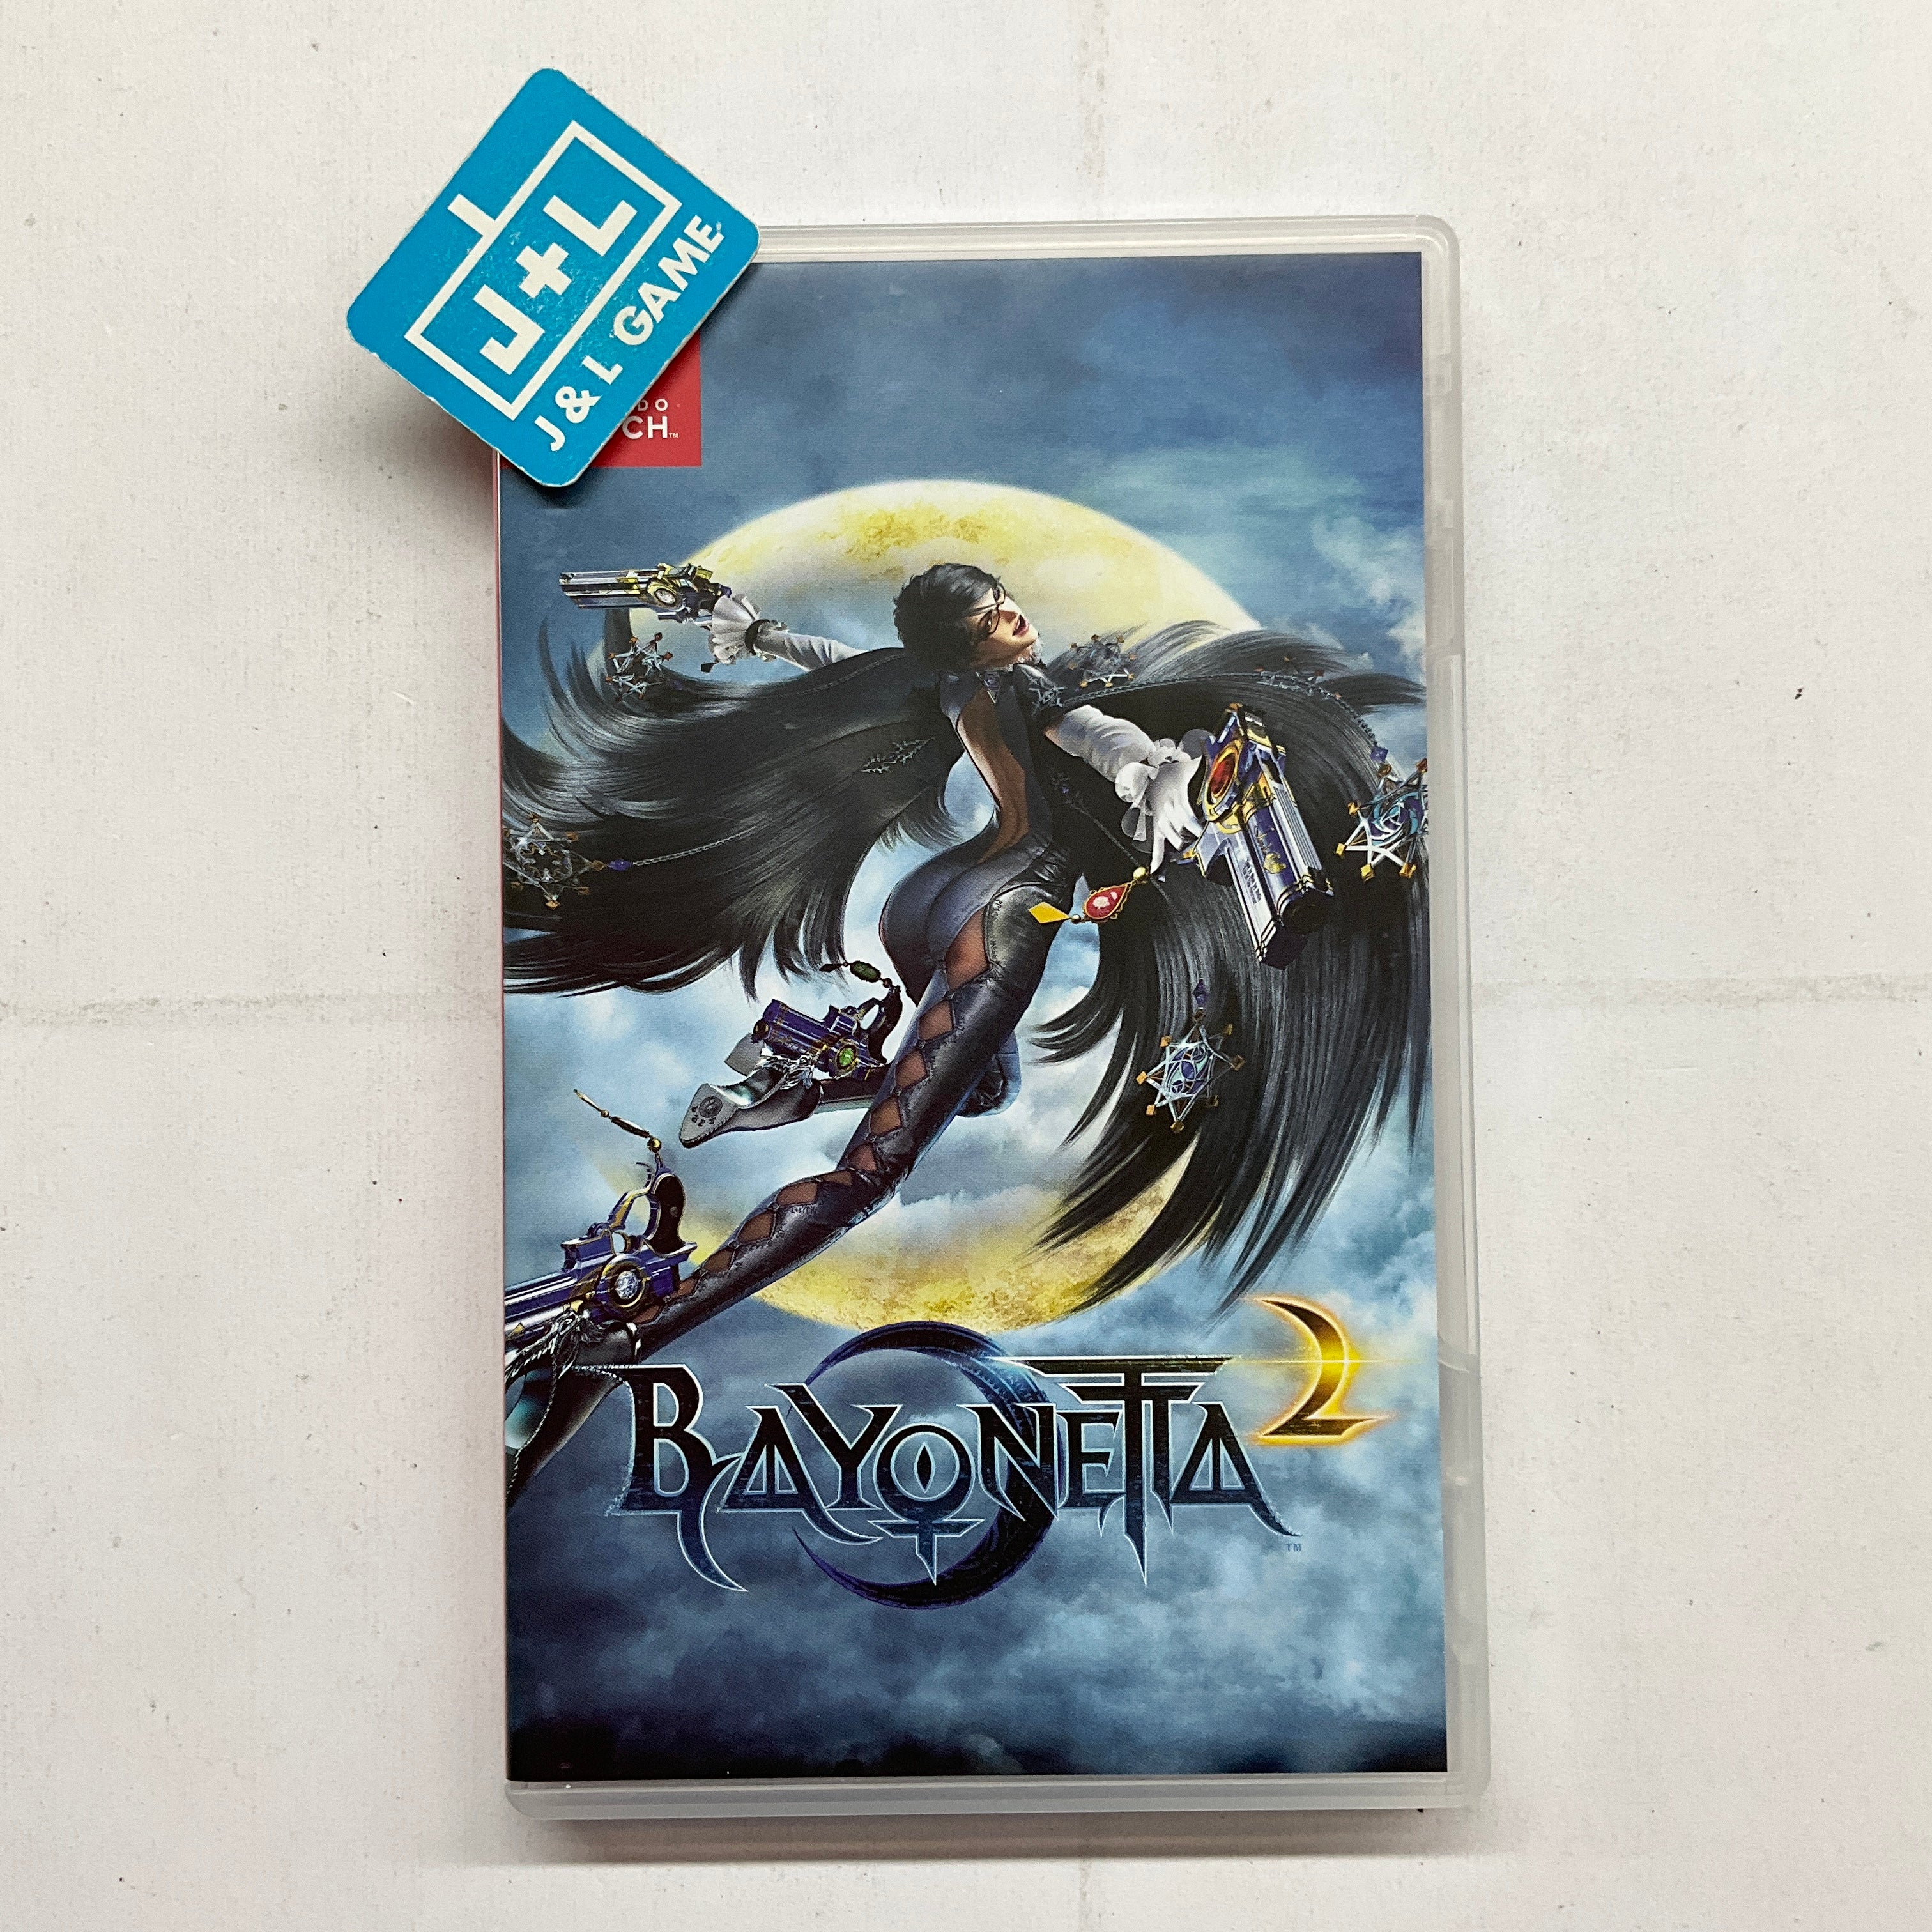 Bayonetta 2 Special Edition - (NSW) Nintendo Switch (European Import) [Open Box] Video Games J&L Video Games New York City   